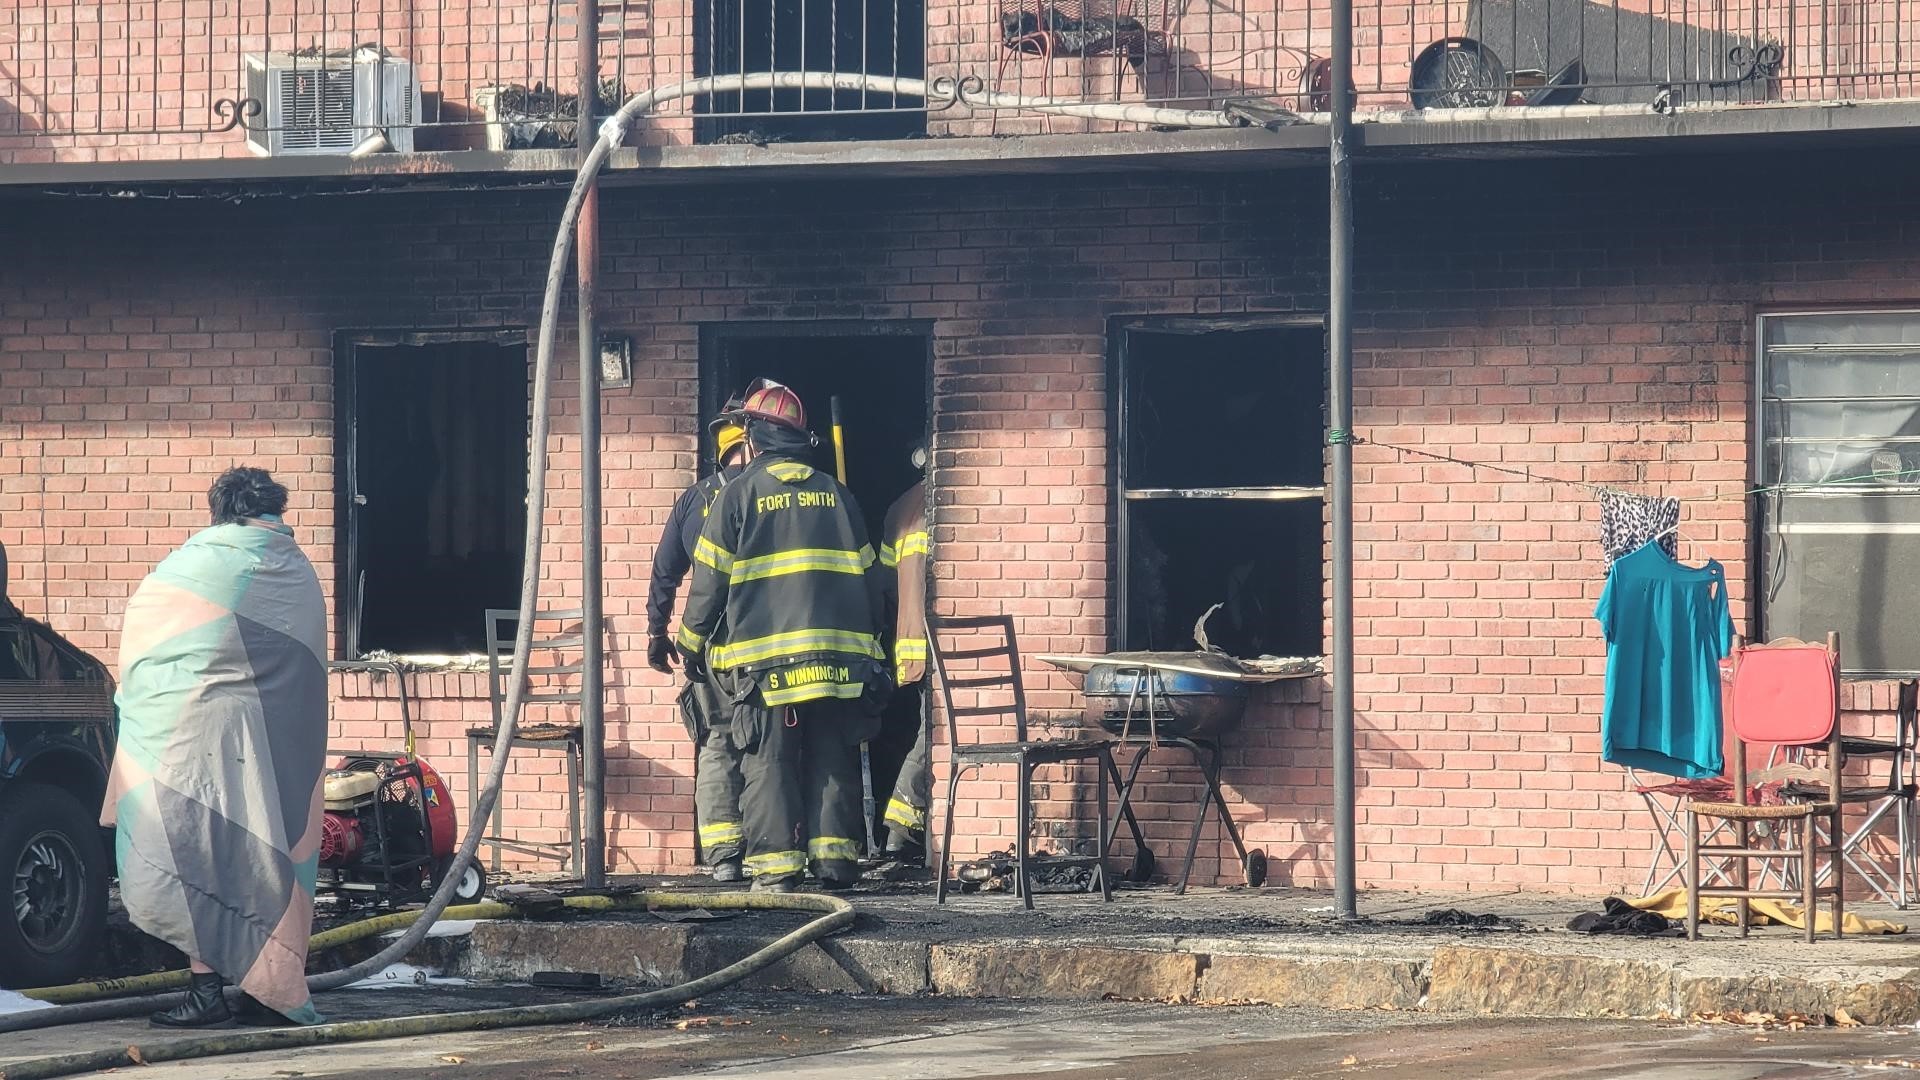 Officials with the FSPD say 12 people were forced out of the complex during the fire, which caused damage to six units in the building.